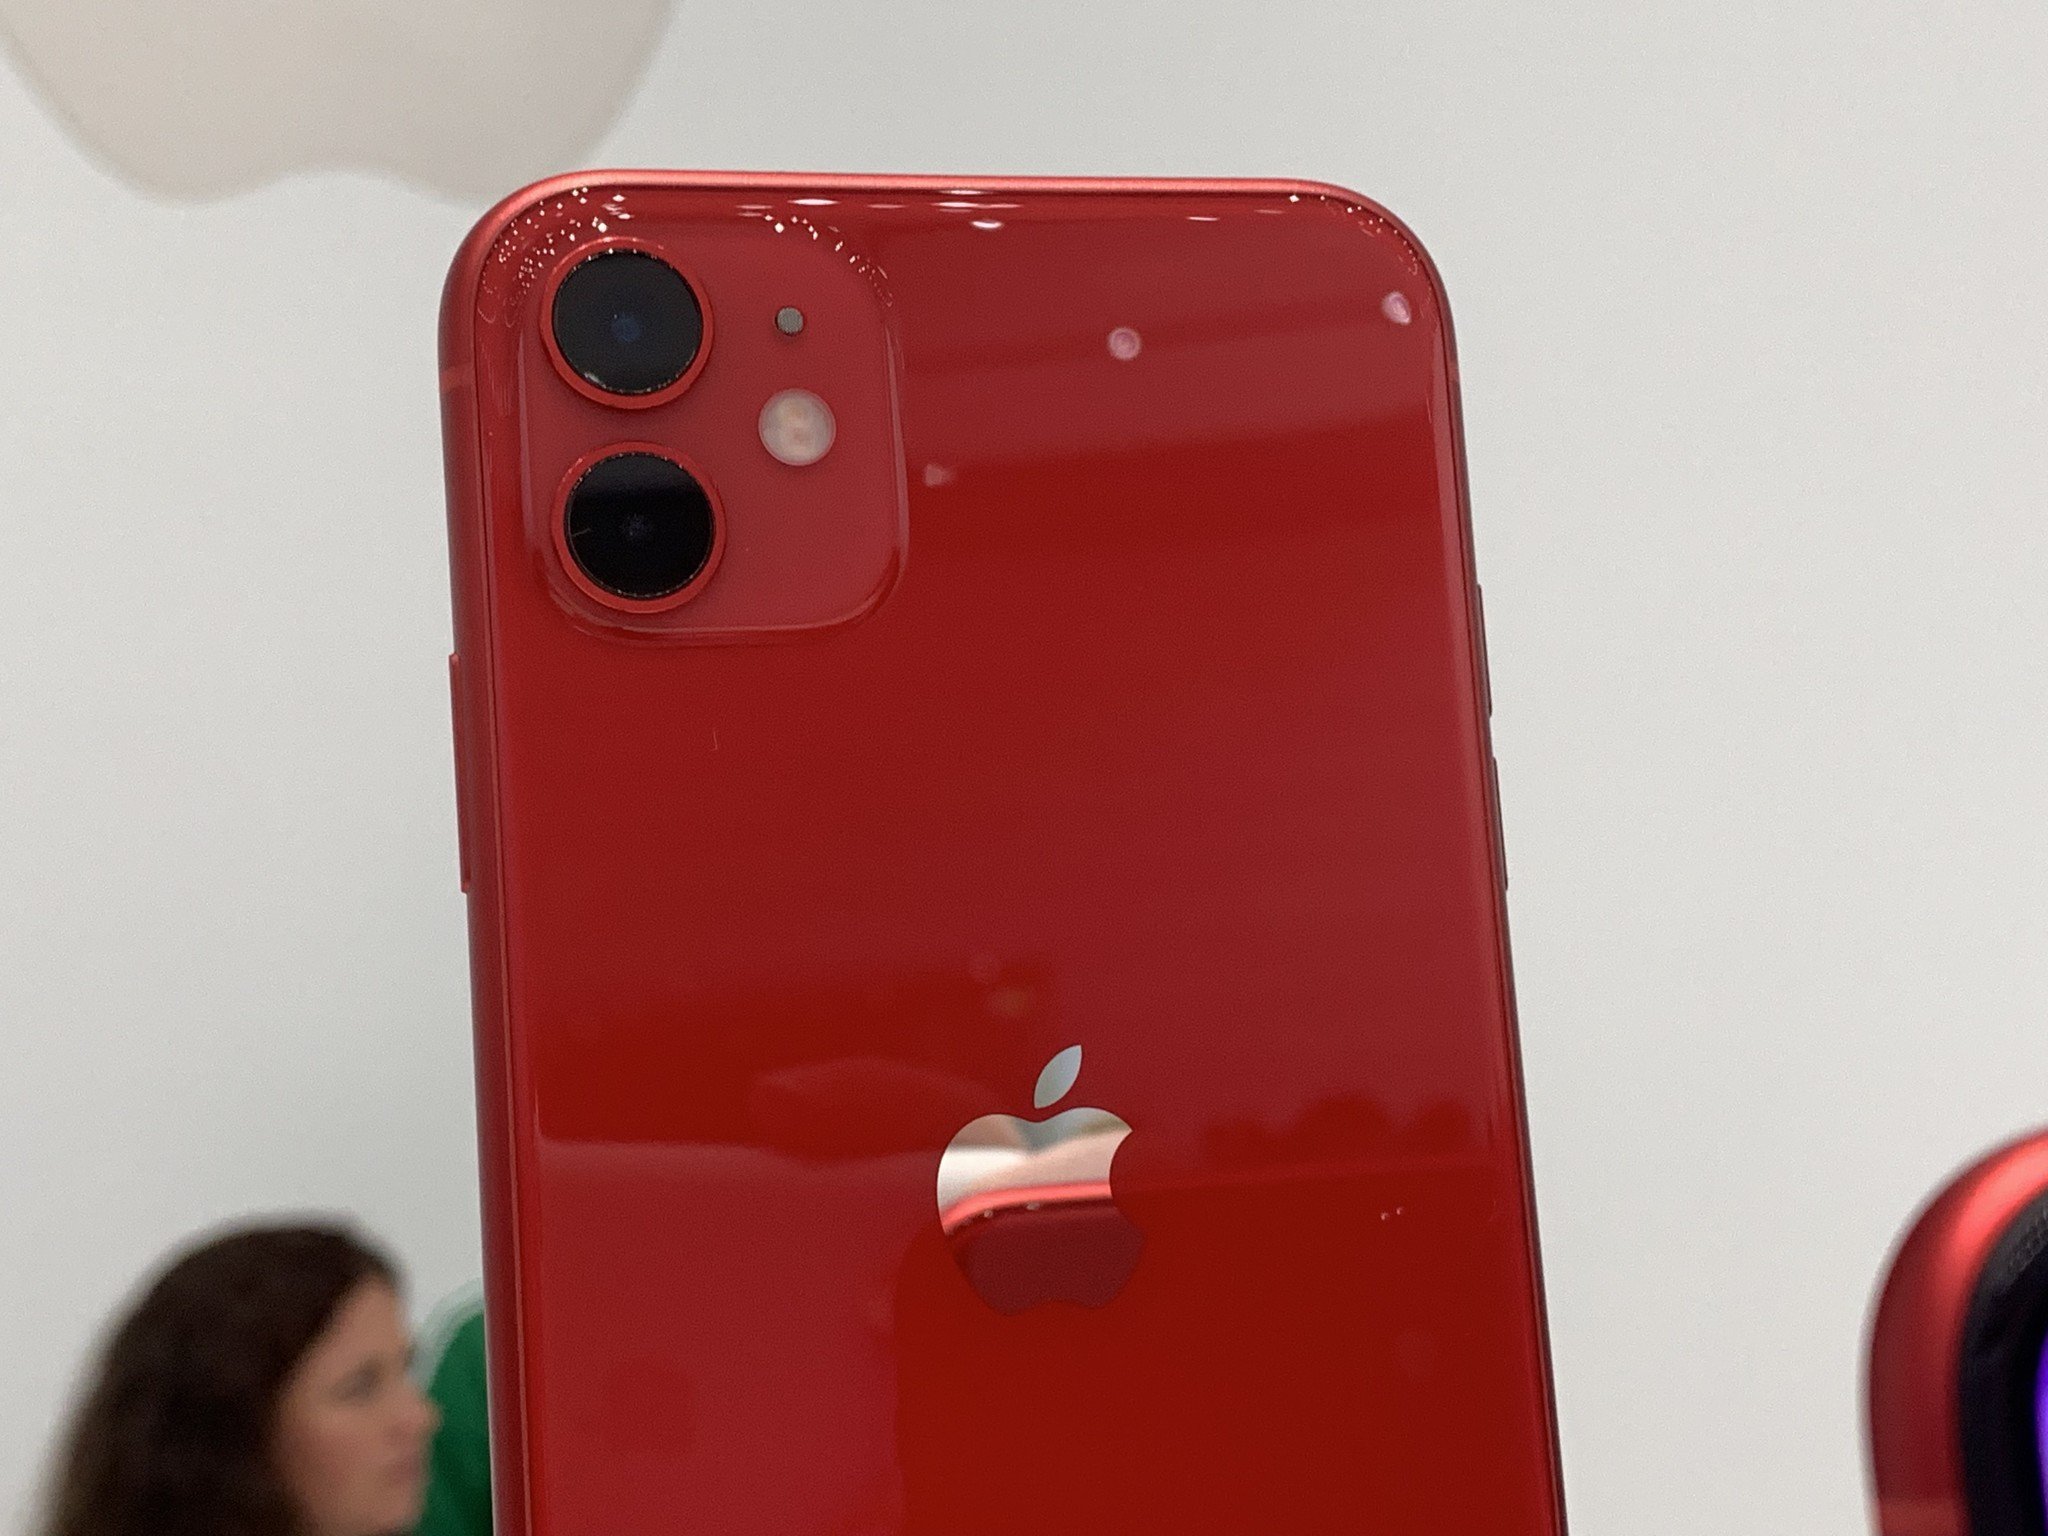 iPhone 11 in (Product)RED